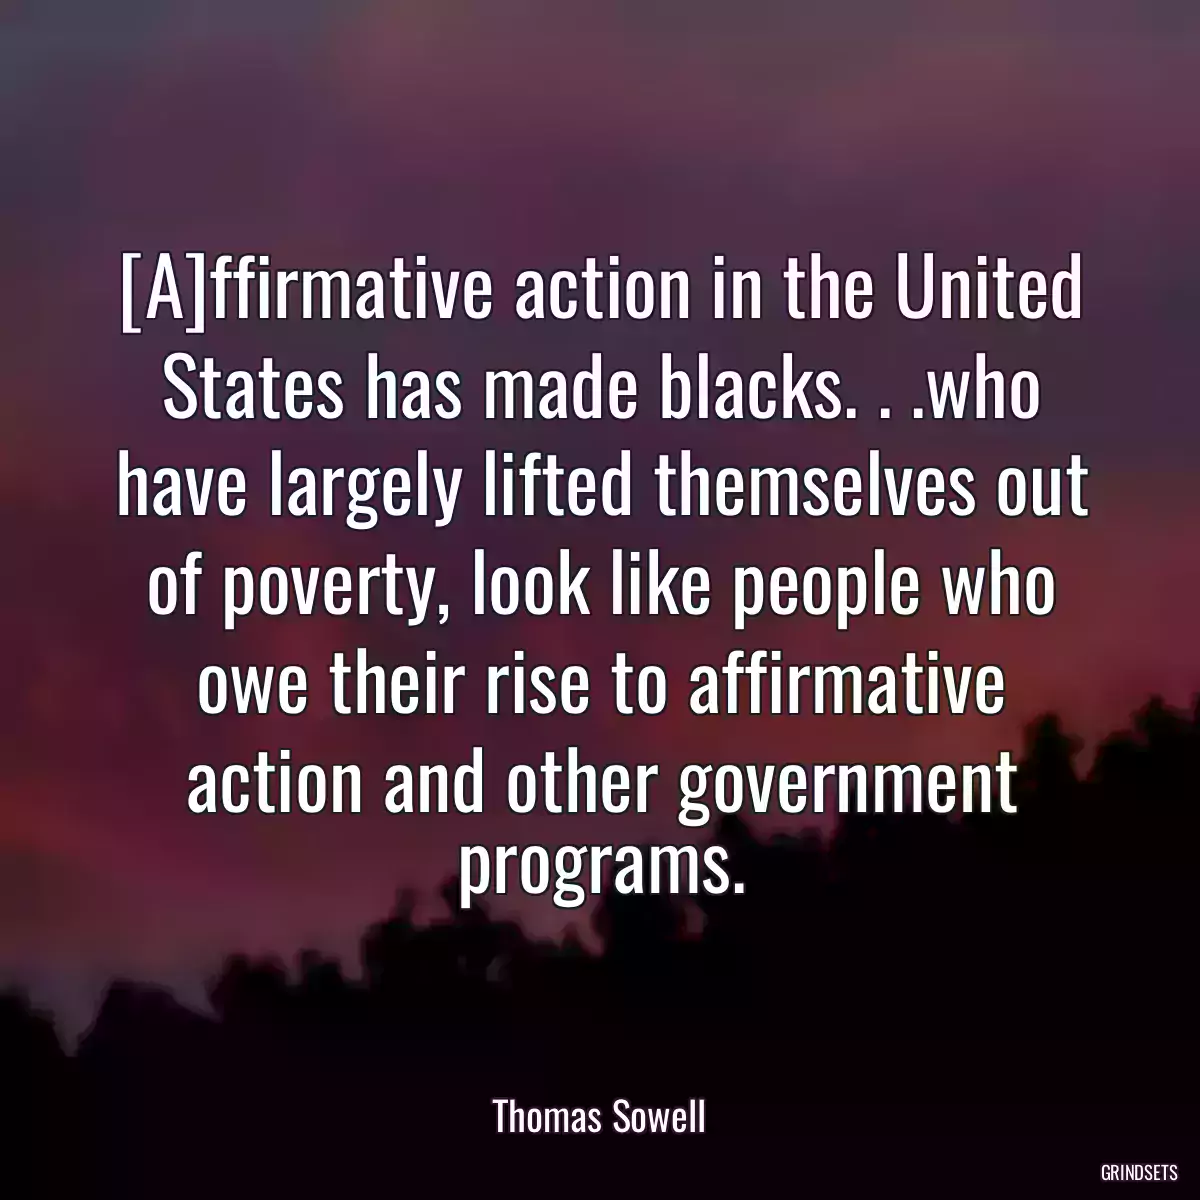 [A]ffirmative action in the United States has made blacks. . .who have largely lifted themselves out of poverty, look like people who owe their rise to affirmative action and other government programs.